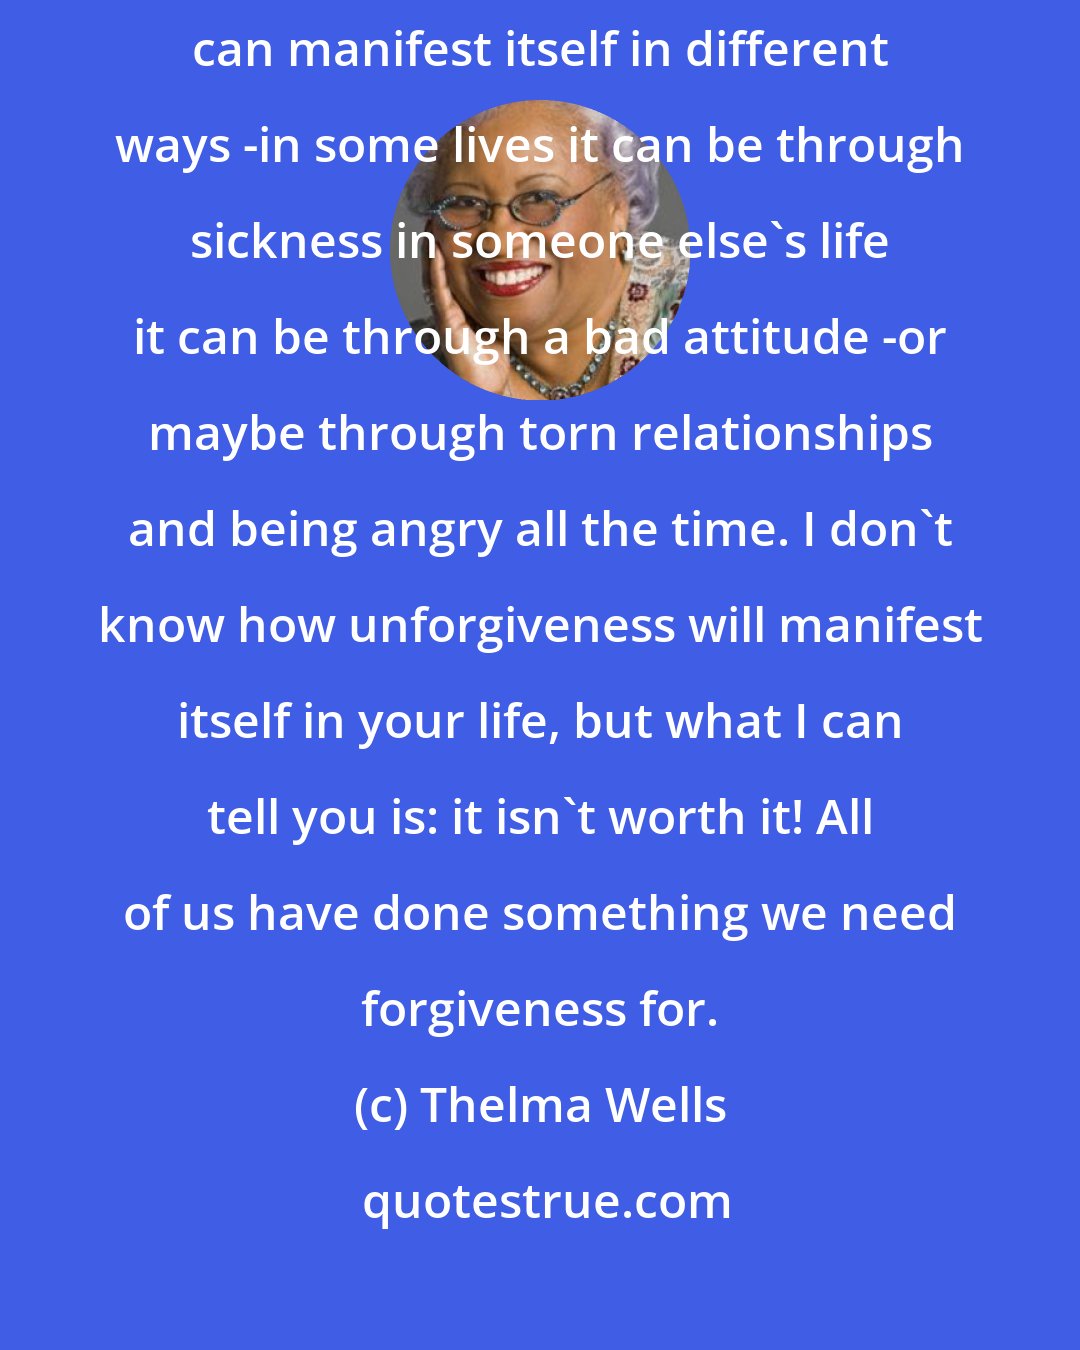 Thelma Wells: Everything you go through can be a lesson for you. Lack of forgiveness can manifest itself in different ways -in some lives it can be through sickness in someone else's life it can be through a bad attitude -or maybe through torn relationships and being angry all the time. I don't know how unforgiveness will manifest itself in your life, but what I can tell you is: it isn't worth it! All of us have done something we need forgiveness for.